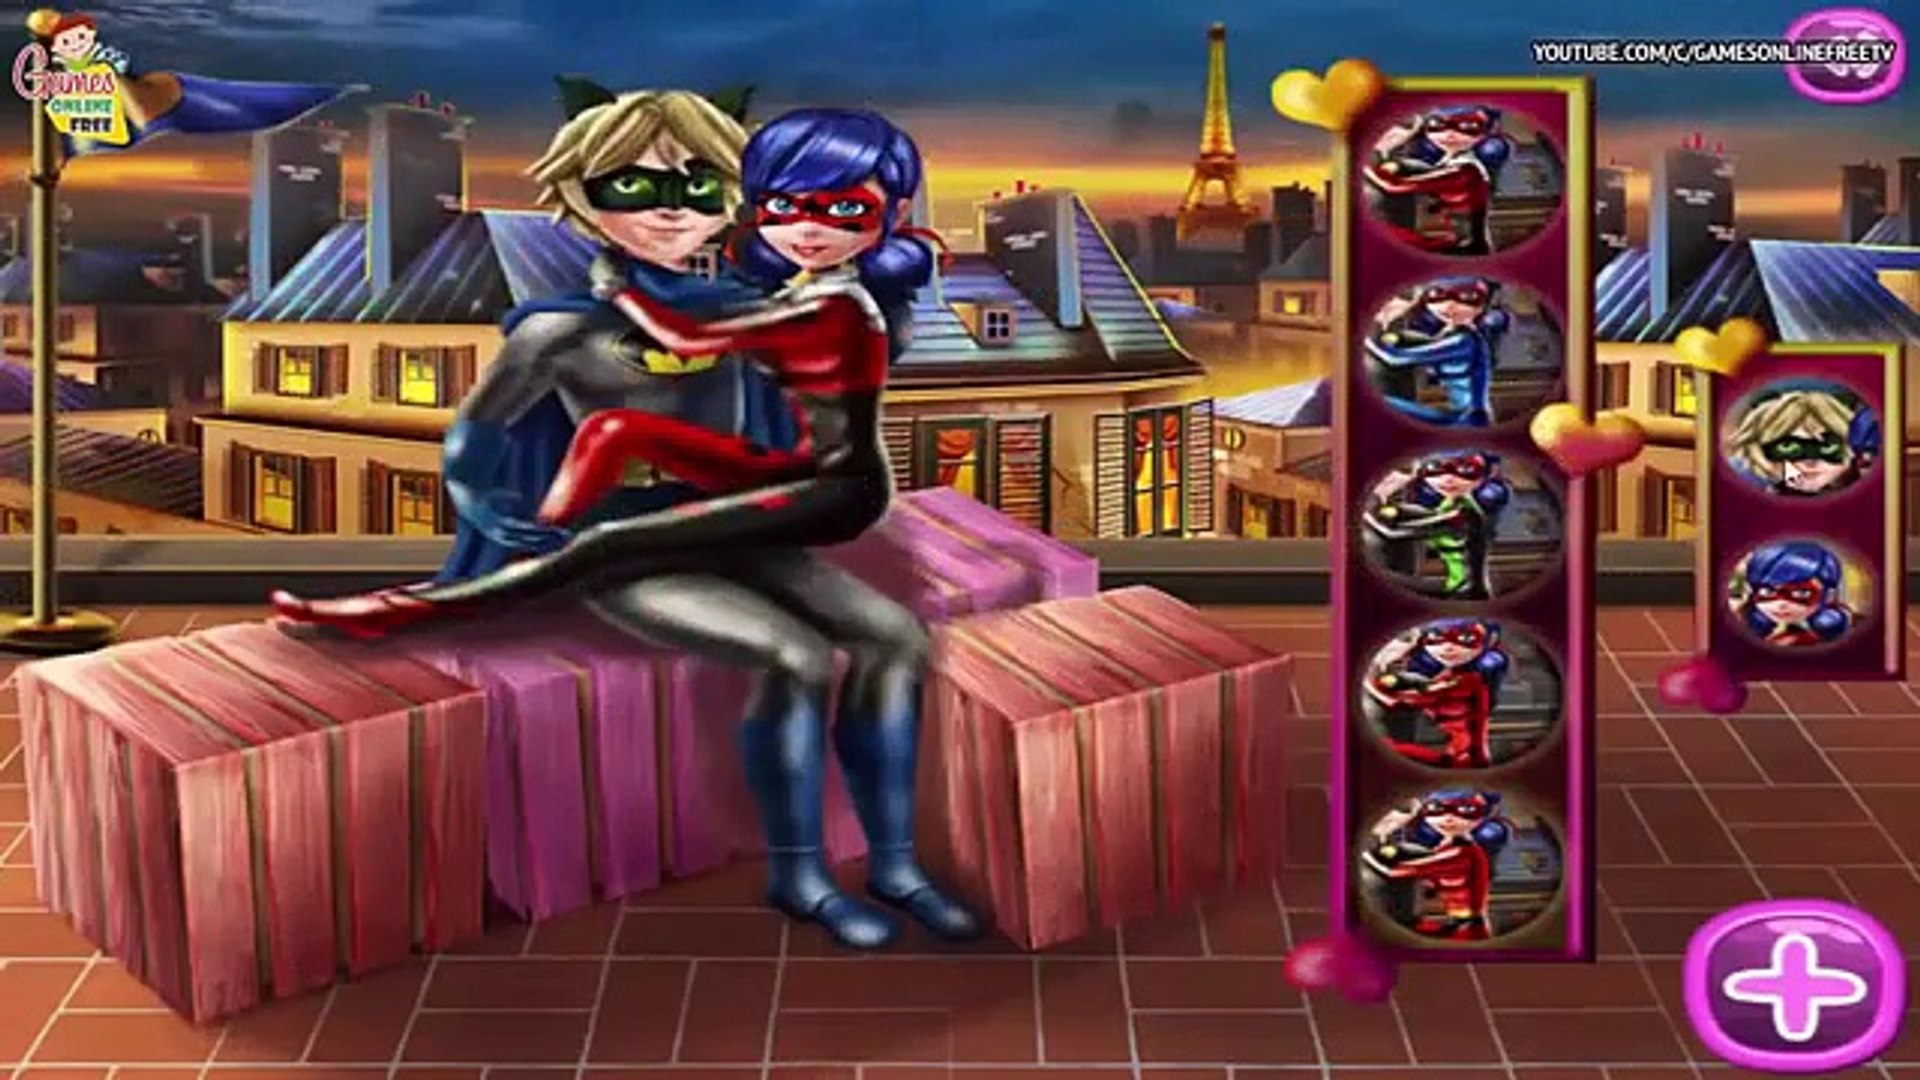 Ladybug Saved Cat Noir from Hawk Moth - Miraculous Ladybug and Cat Noir in Love - Full Episode Games